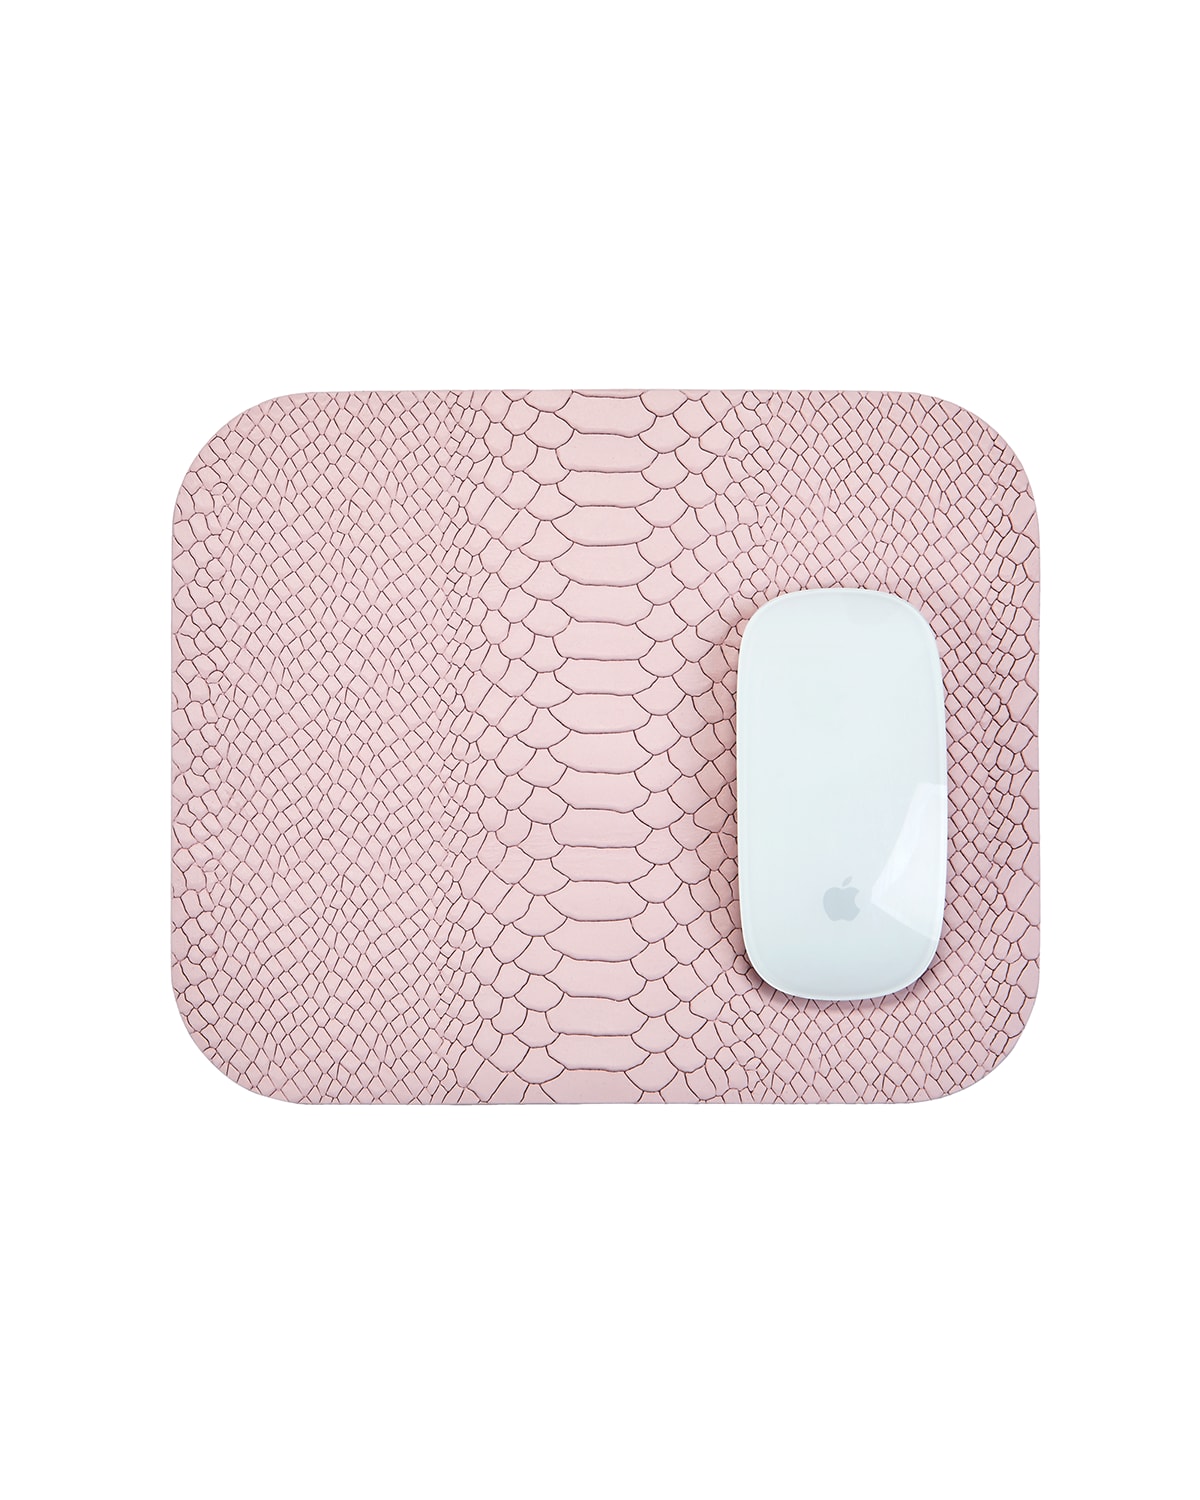 Shop Graphic Image Mousepad In Pink